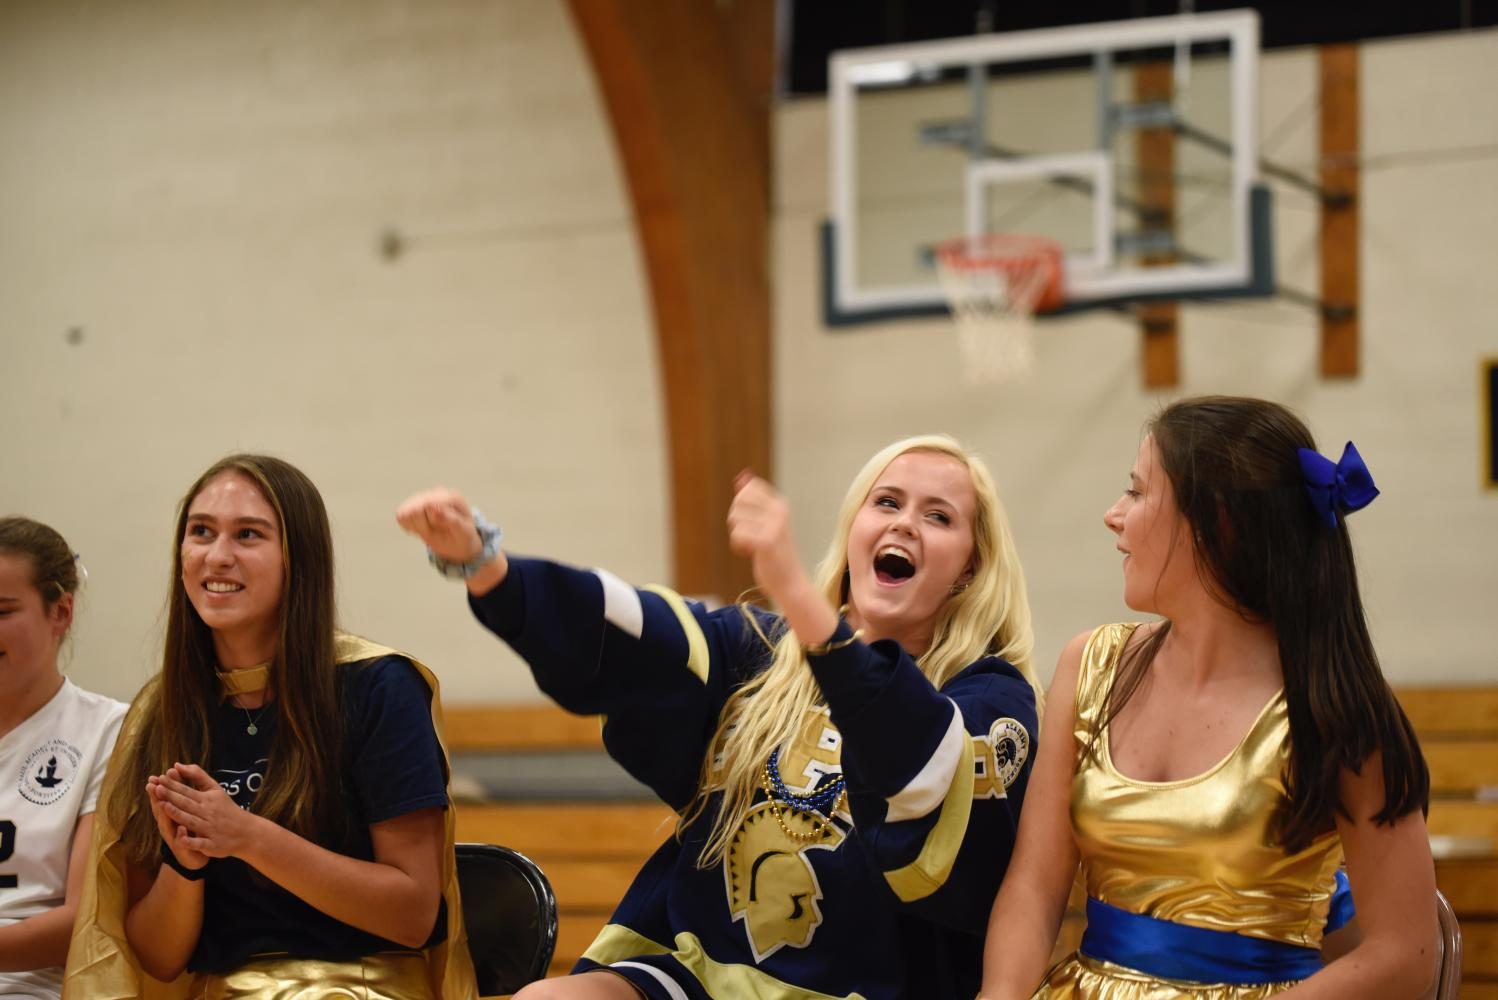 Seniors Emilia Hoppe, Ashley Jallen and Val Hart prepare to race for the captain challenges. Pep Fest is fun every year, but I really tried to embrace every moment of it this year as it was my last, Jallen said.